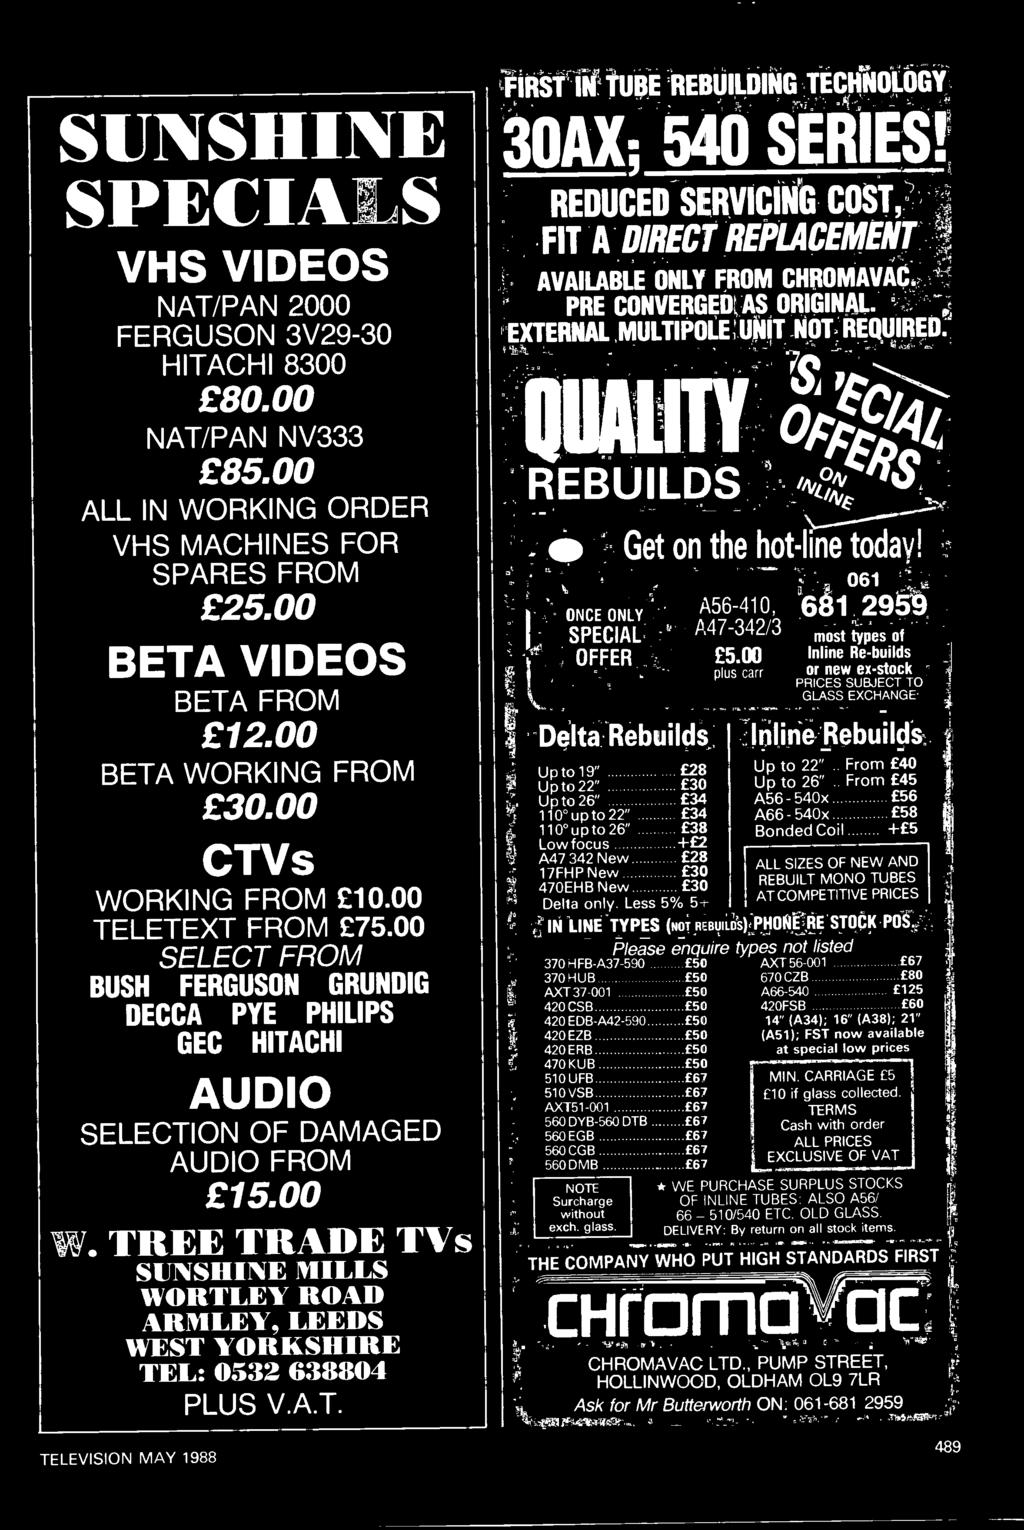 TREE TRADE TVs SUNSHINE MILLS WORTLEY ROAD ARMLEY, LEEDS WEST YORKSHIRE TEL: 0532 638804 PLUS V.A.T. TELEVISION MAY 1988 FIRST IN TUBE REBUILDING TECHNOLOGY 30AX; 540 SERIES!